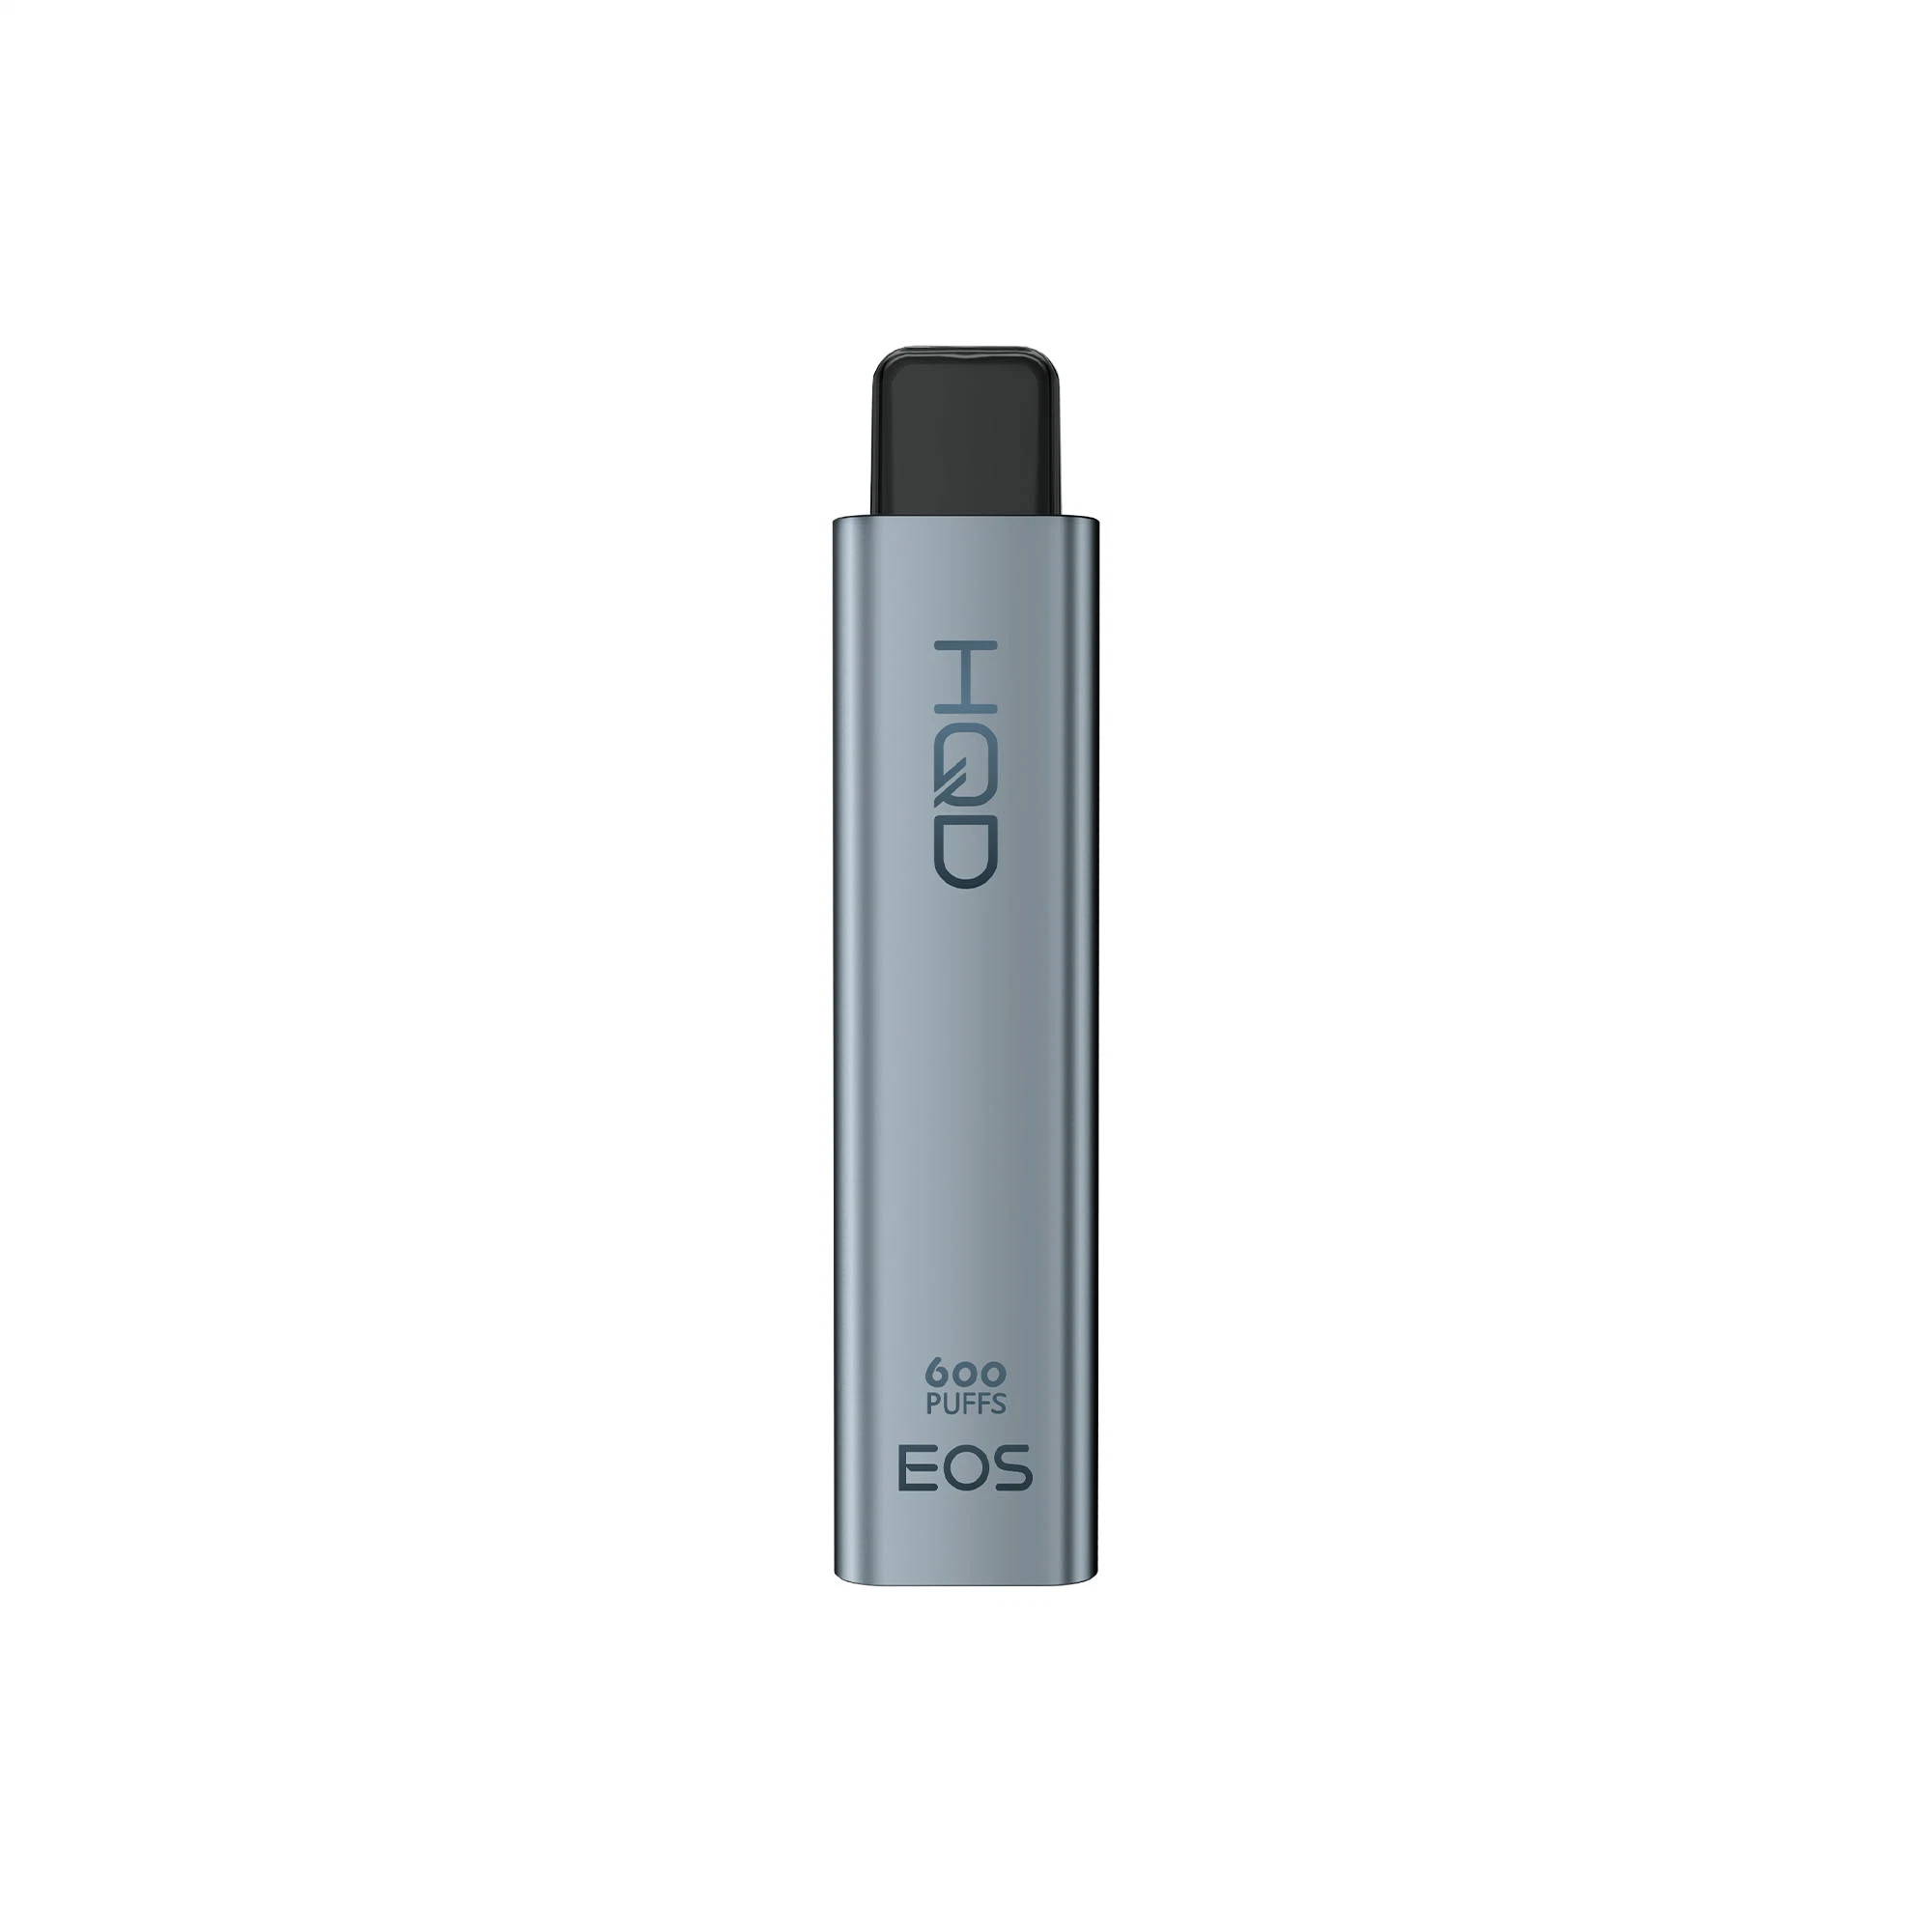 Tpd Hot Selling Disposable/Chargeable Vape Hqd EOS 600 Puffs Germany